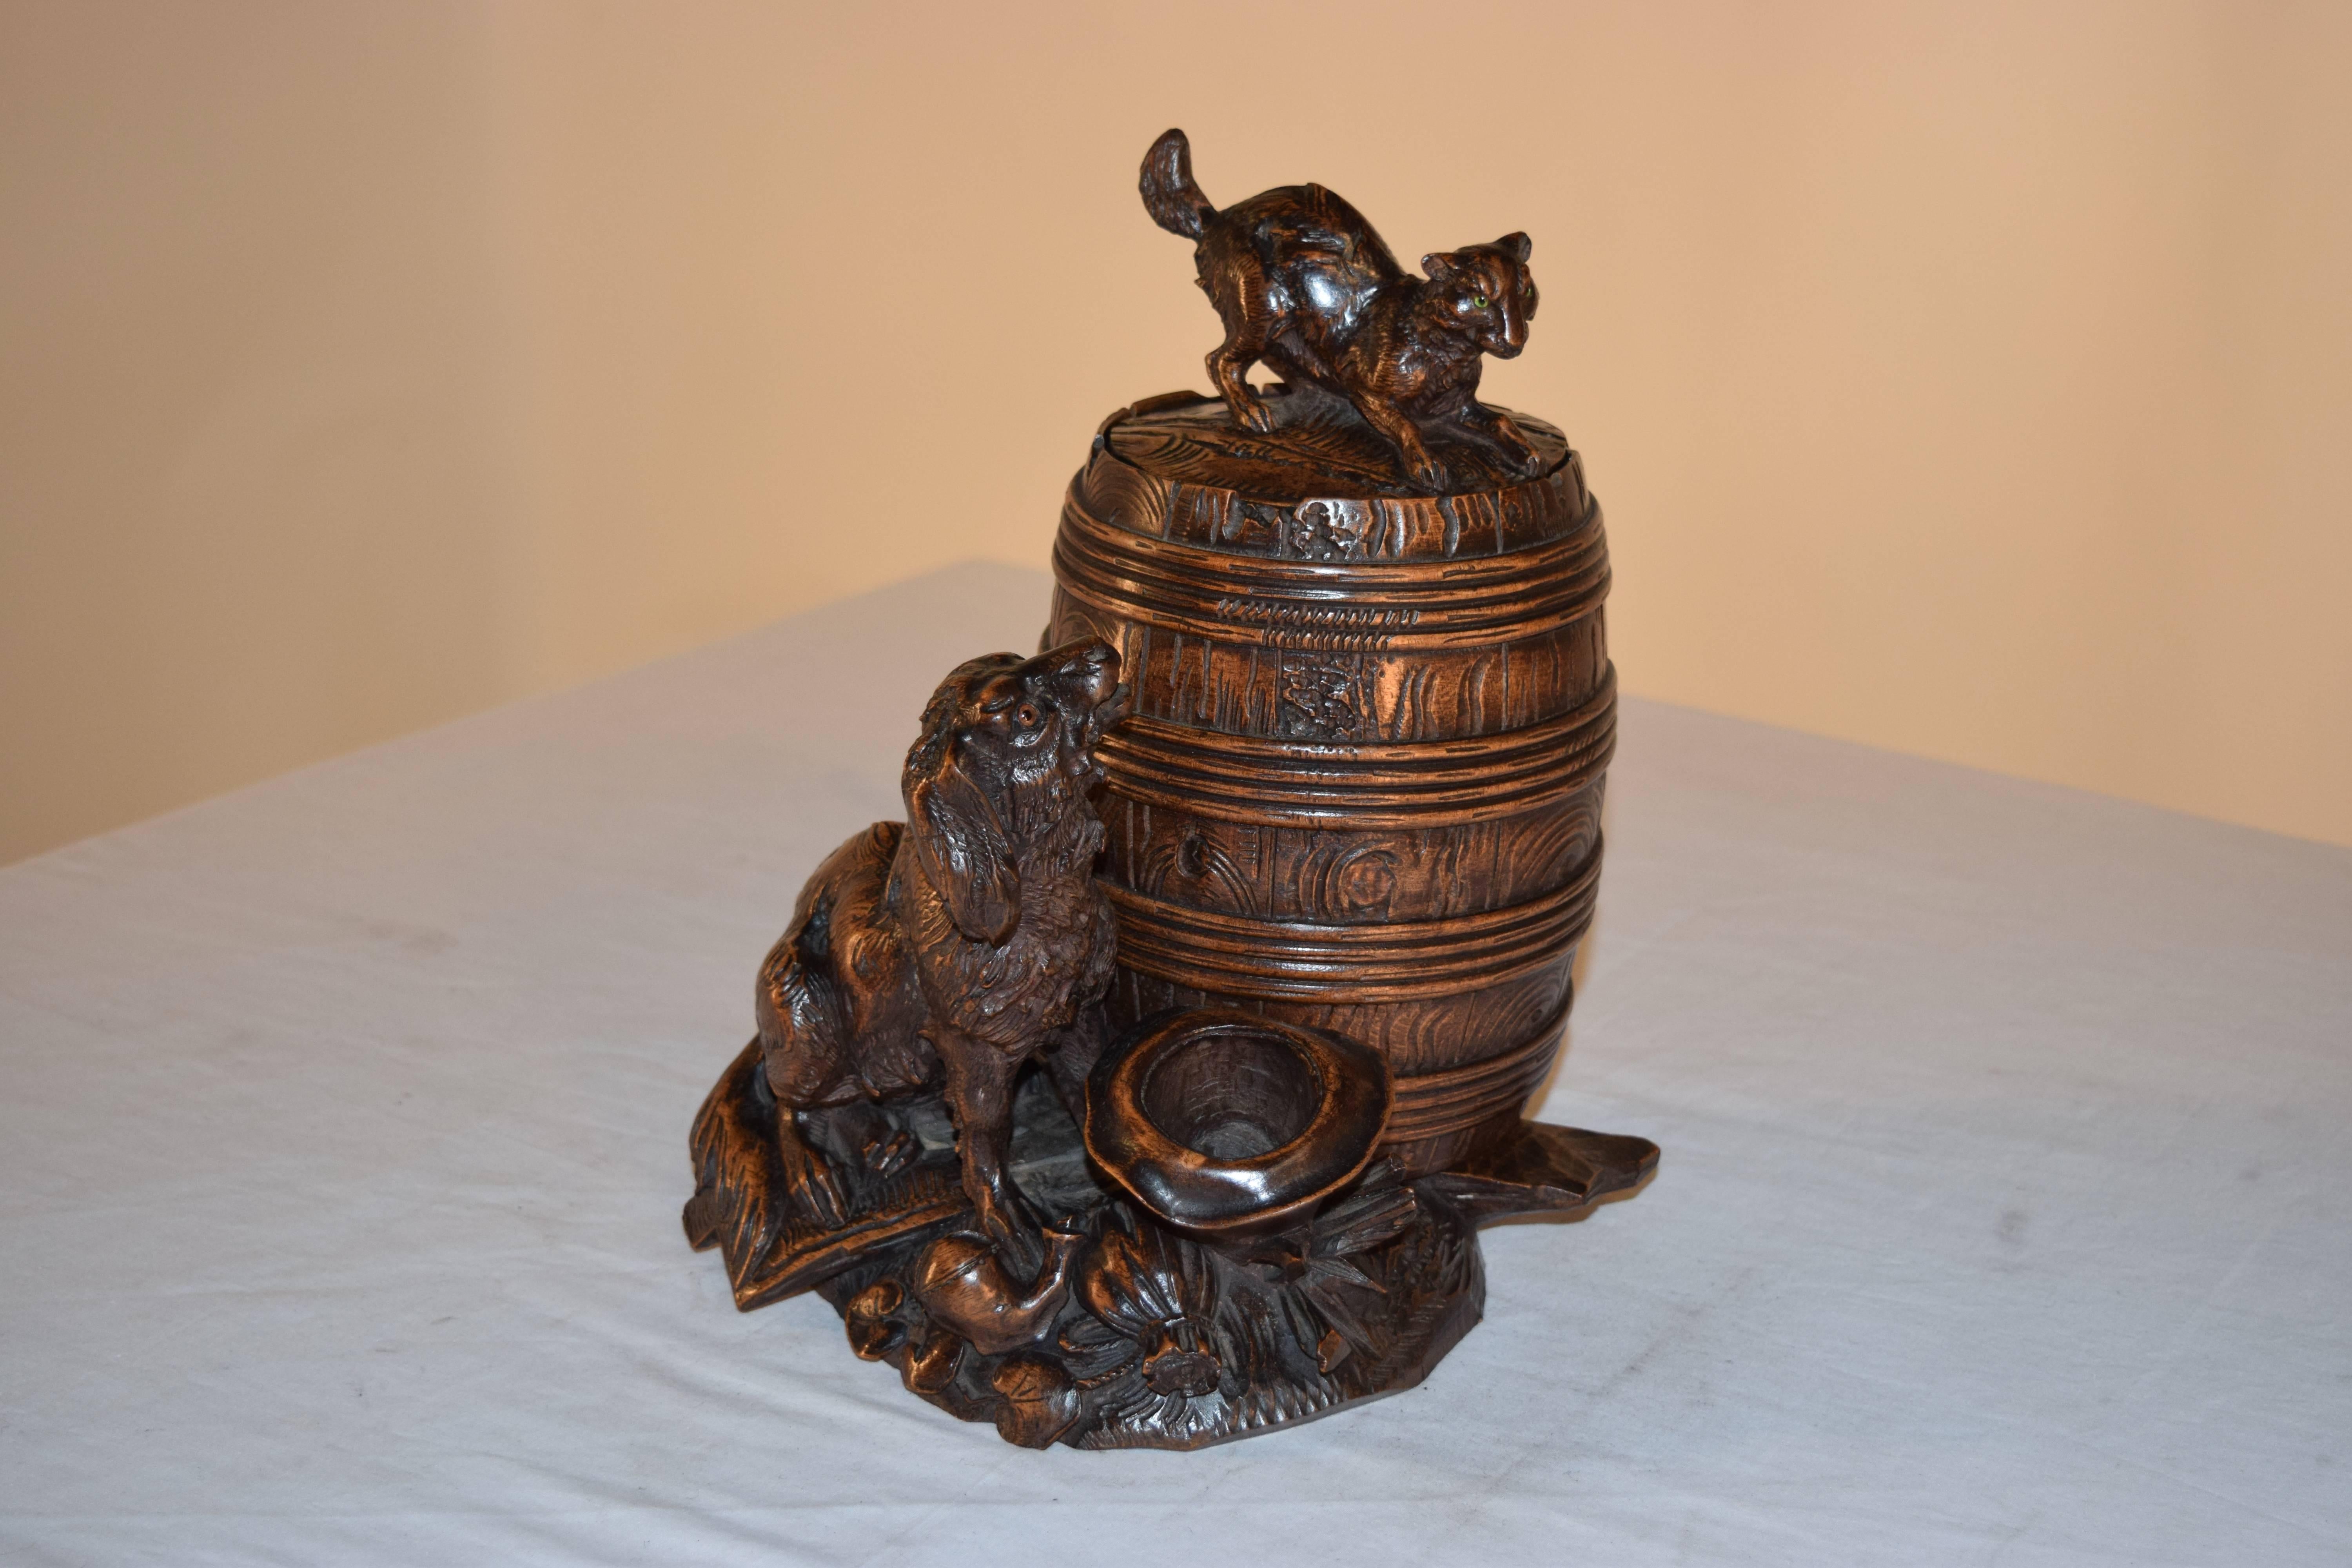 19th century hand-carved black forest humidor with a figure of a dog and cat. The cat is atop a barrel, which has a lid which lifts to reveal a compartment for tobacco. The barrel is sitting on a base with hand-carved sticks and logs and an upside